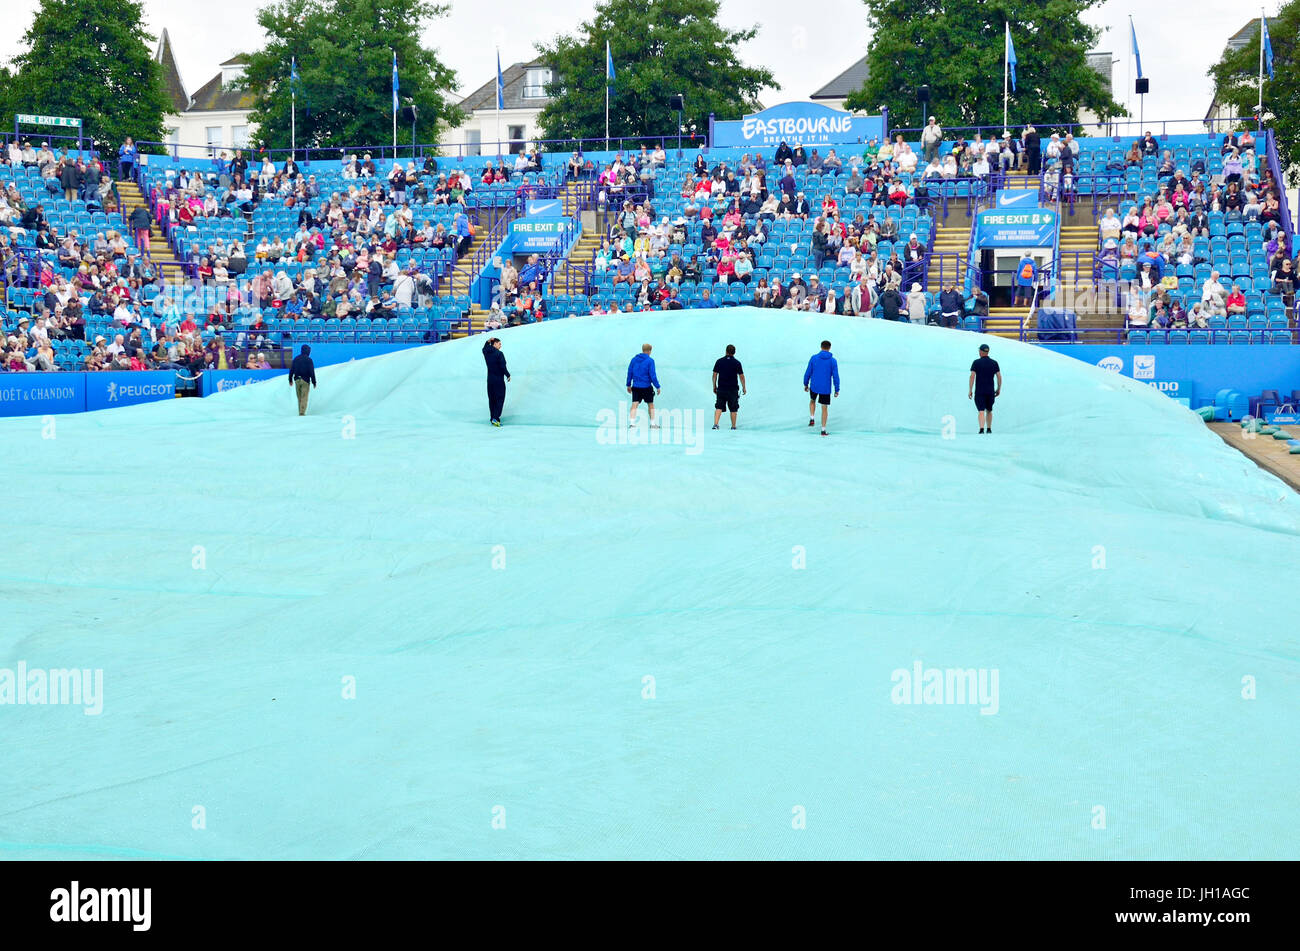 Devonshire Park, Eastbourne. Walking across the covers to remove the air trapped underneath before taking them off centre court after a rain delay... Stock Photo